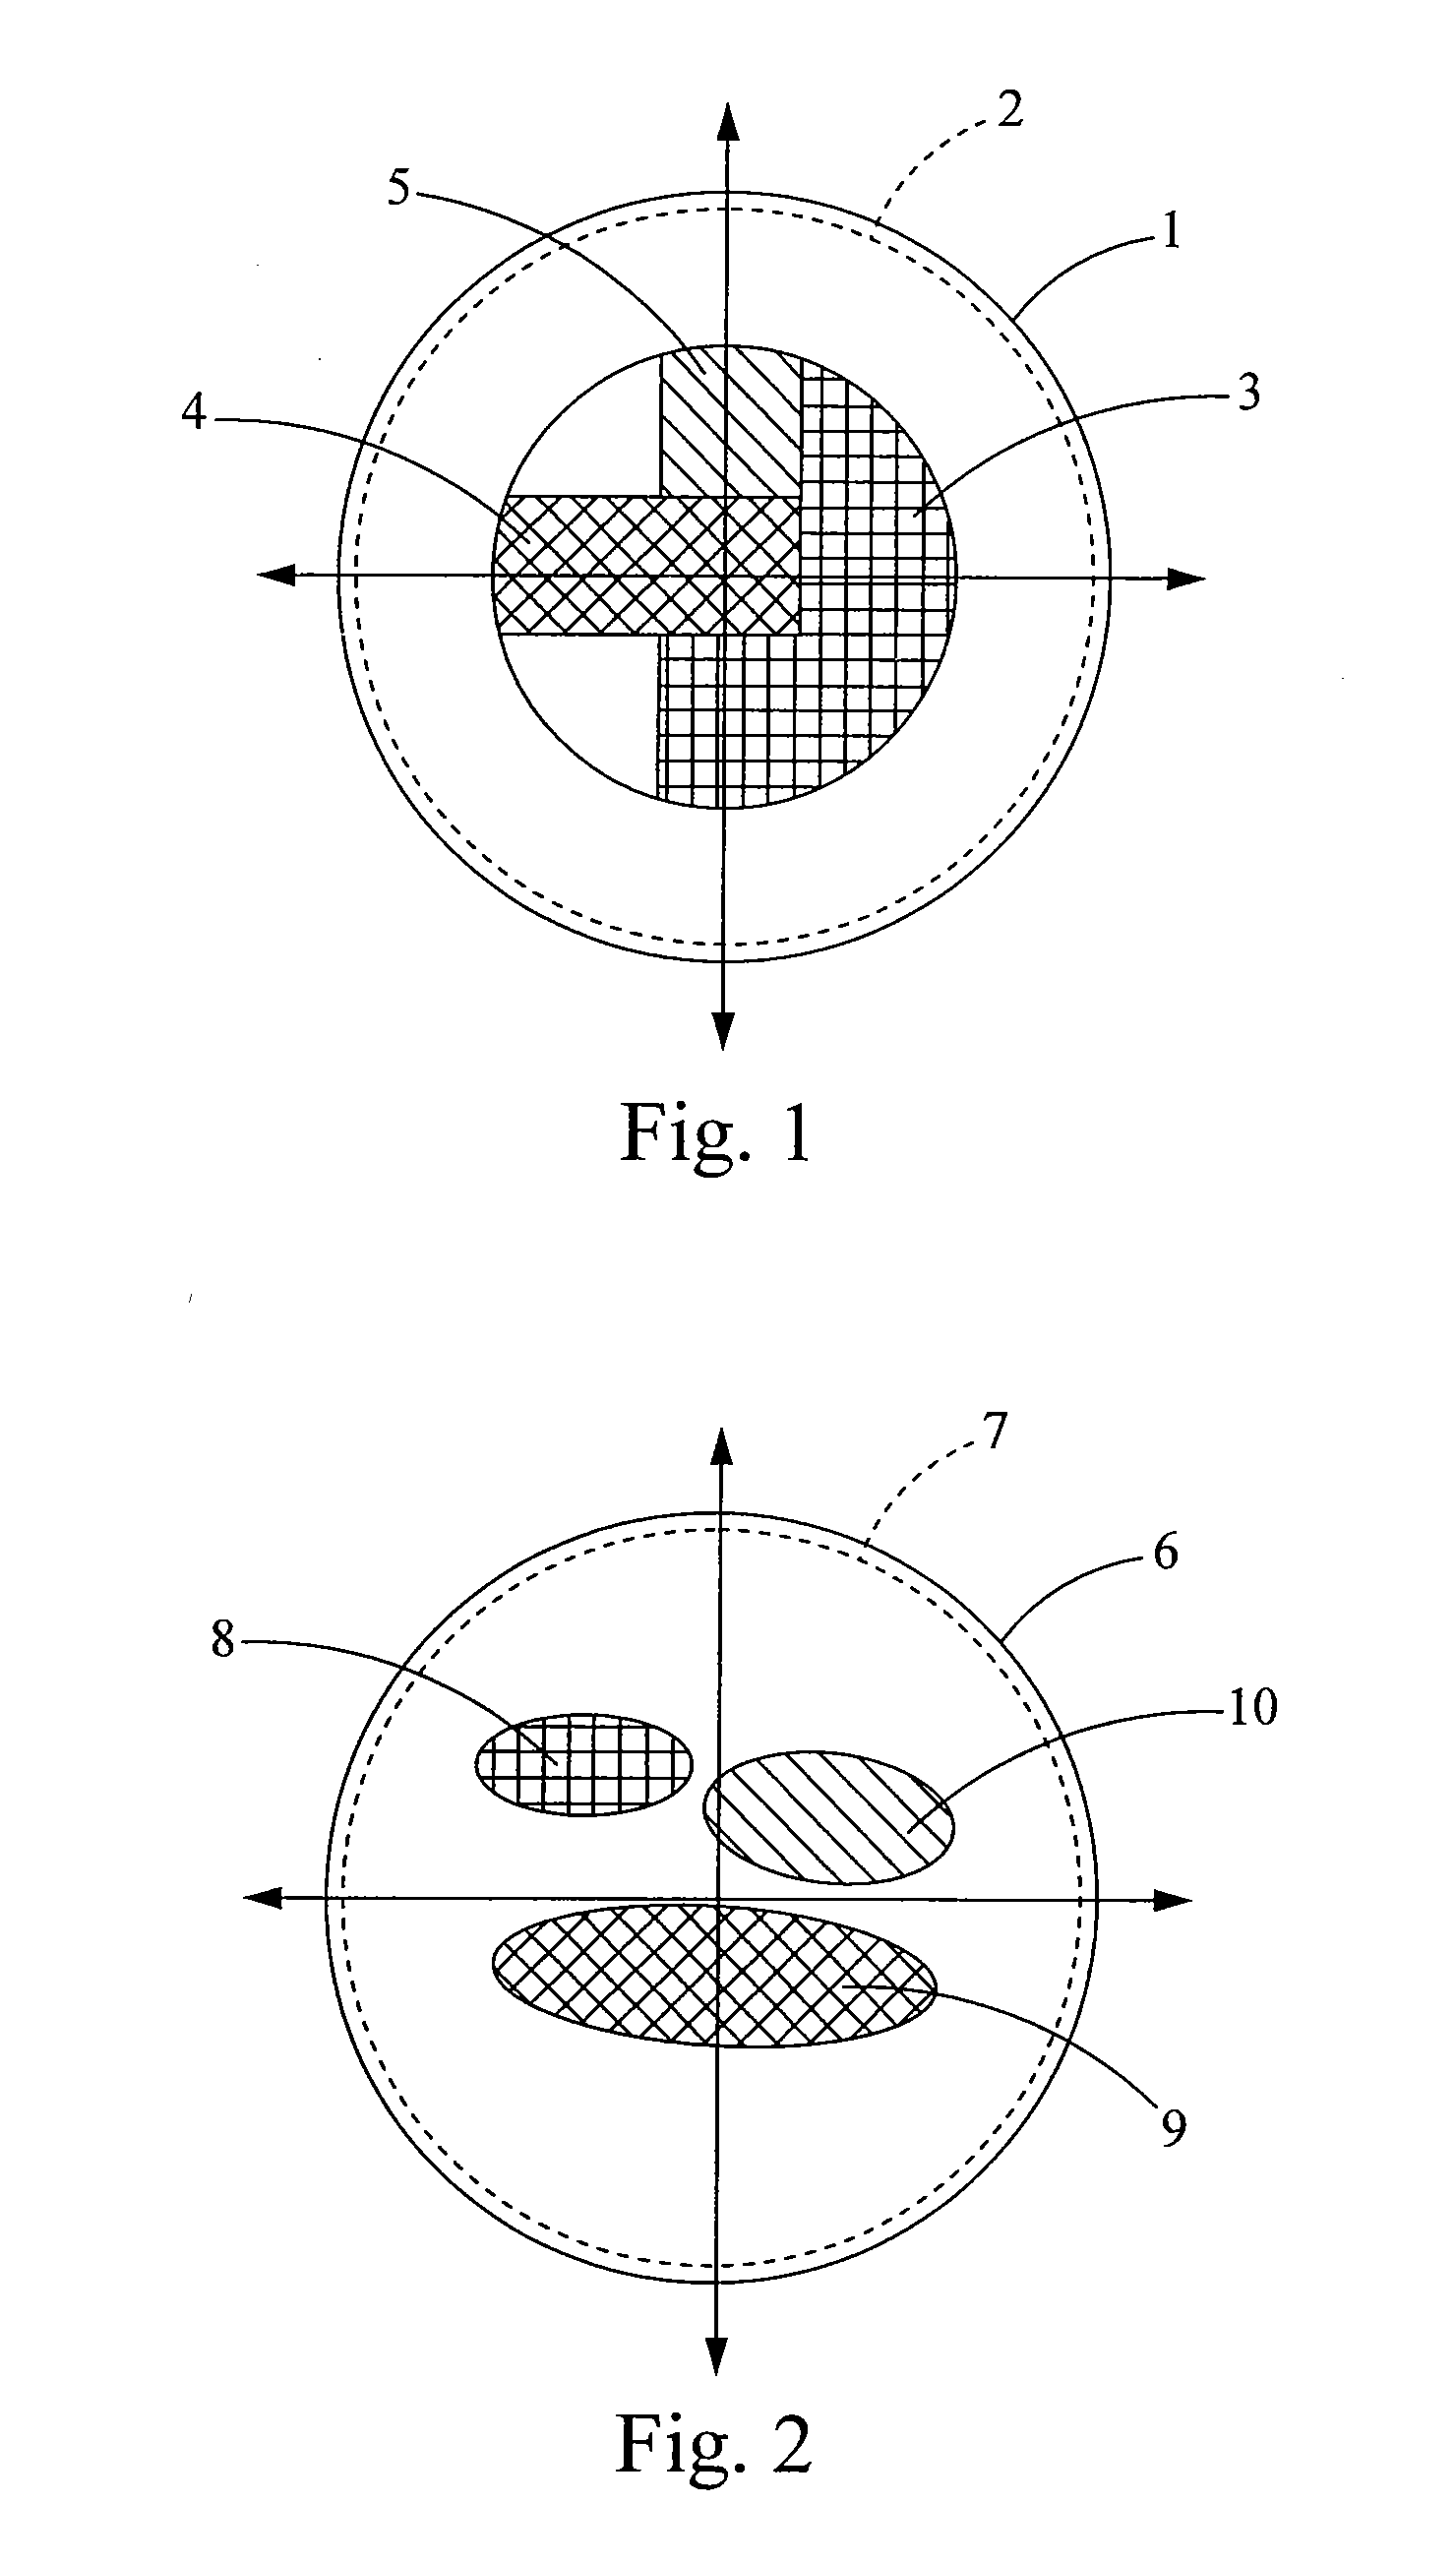 System and method for providing laser shot patterns to the lens of an eye